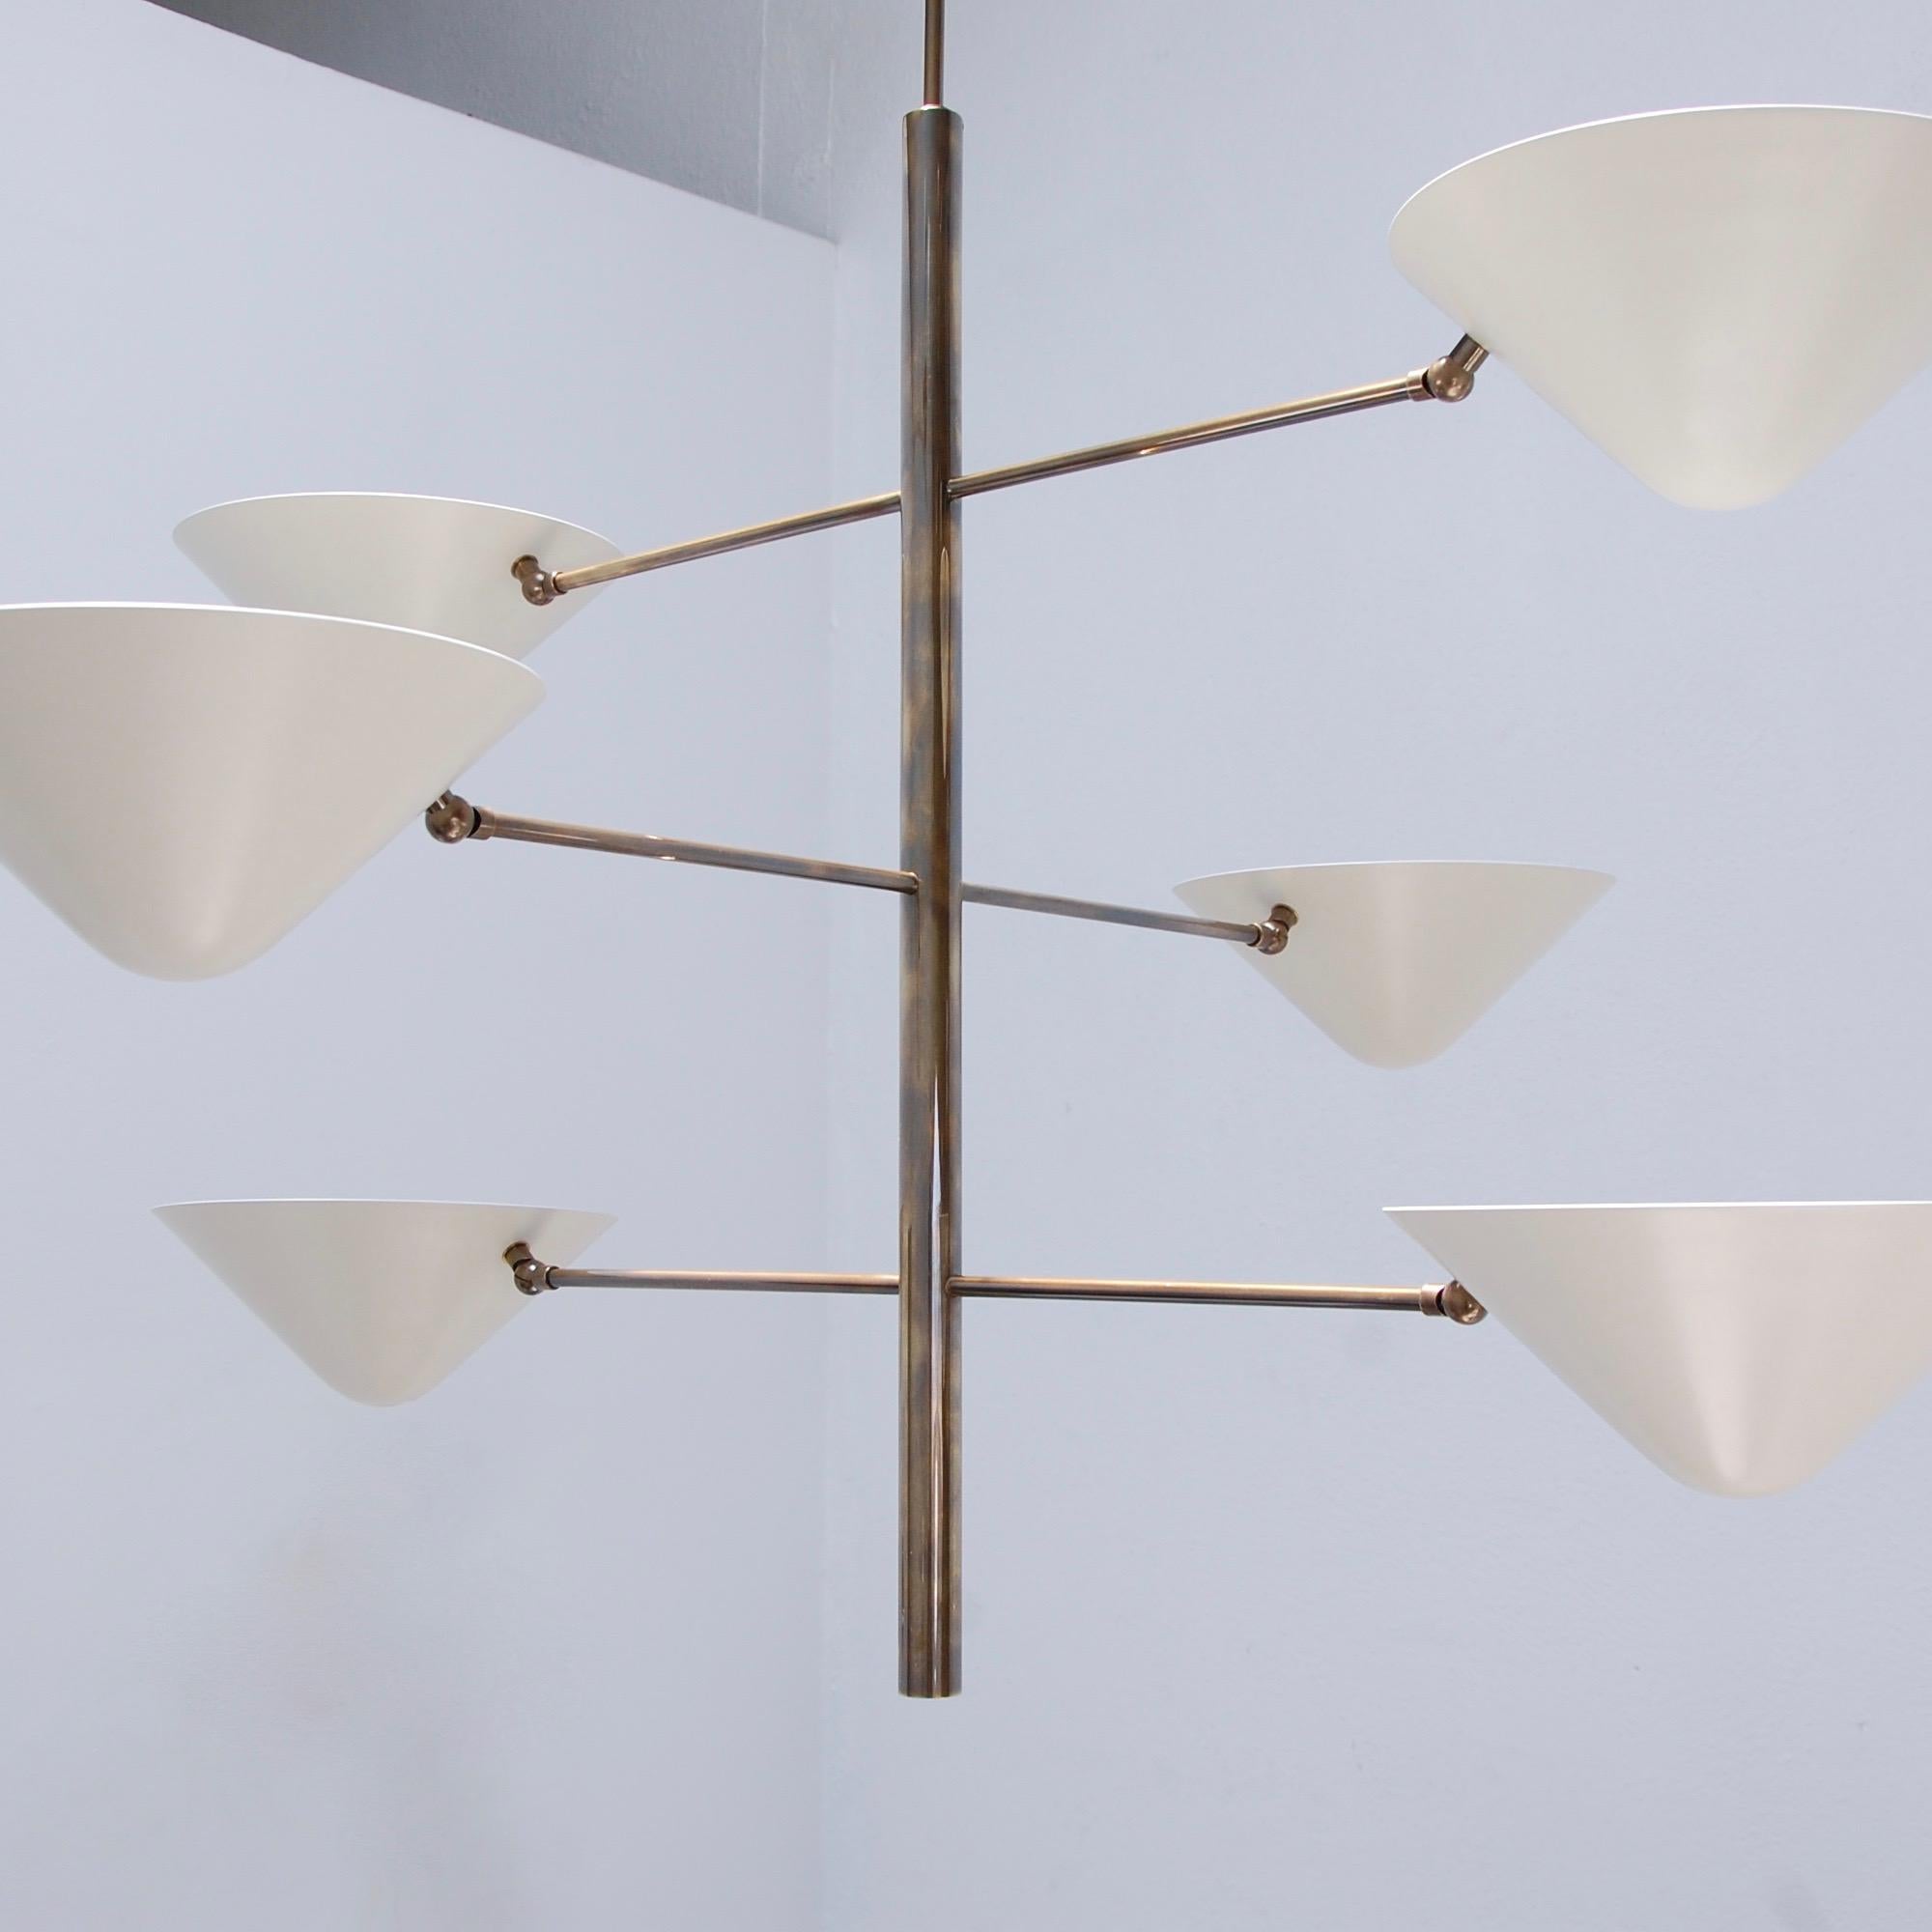 Organic inspired chandelier that combines geometry with botanical aspects. Having six top open shades for indirect lighting. A single medium based E26 socket per shade. Made in custom sizes, but standards are listed.
Brass and painted aluminum.